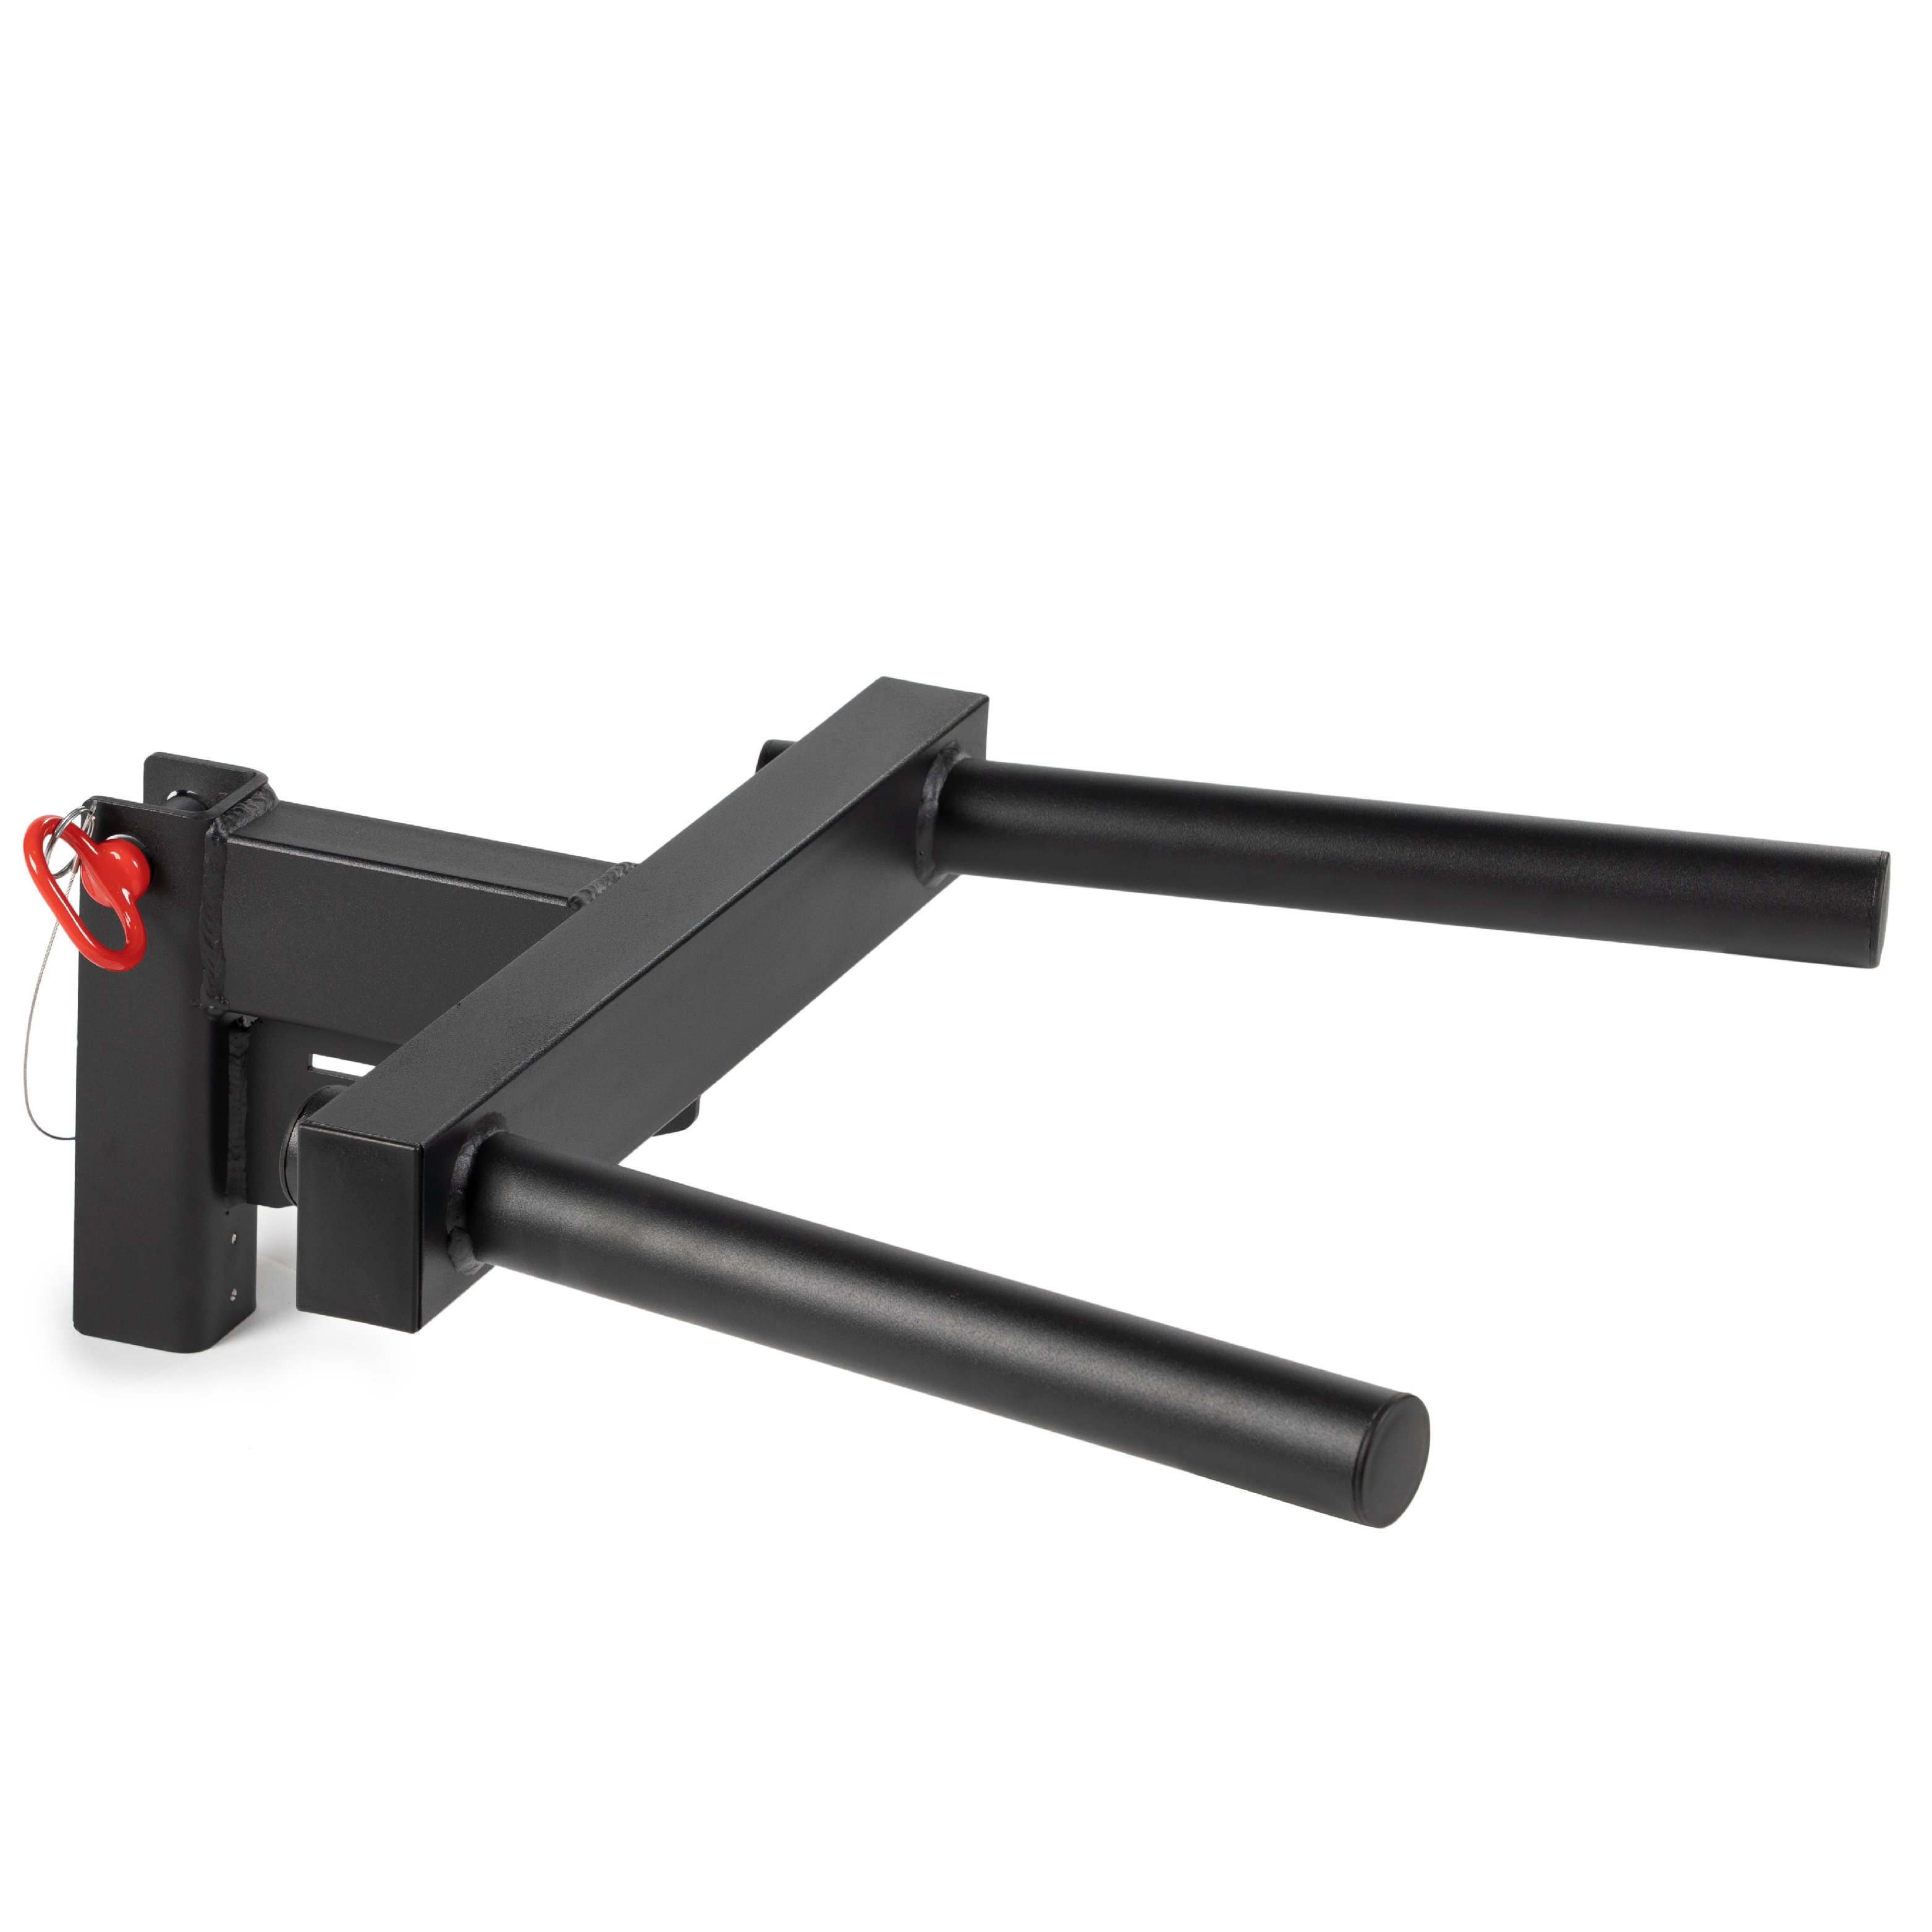 Powergainz Set of 2 Dip Bar Attachments Designed to fit 2 x 2 Tube Power Racks/Power Cage with 1 Hole 